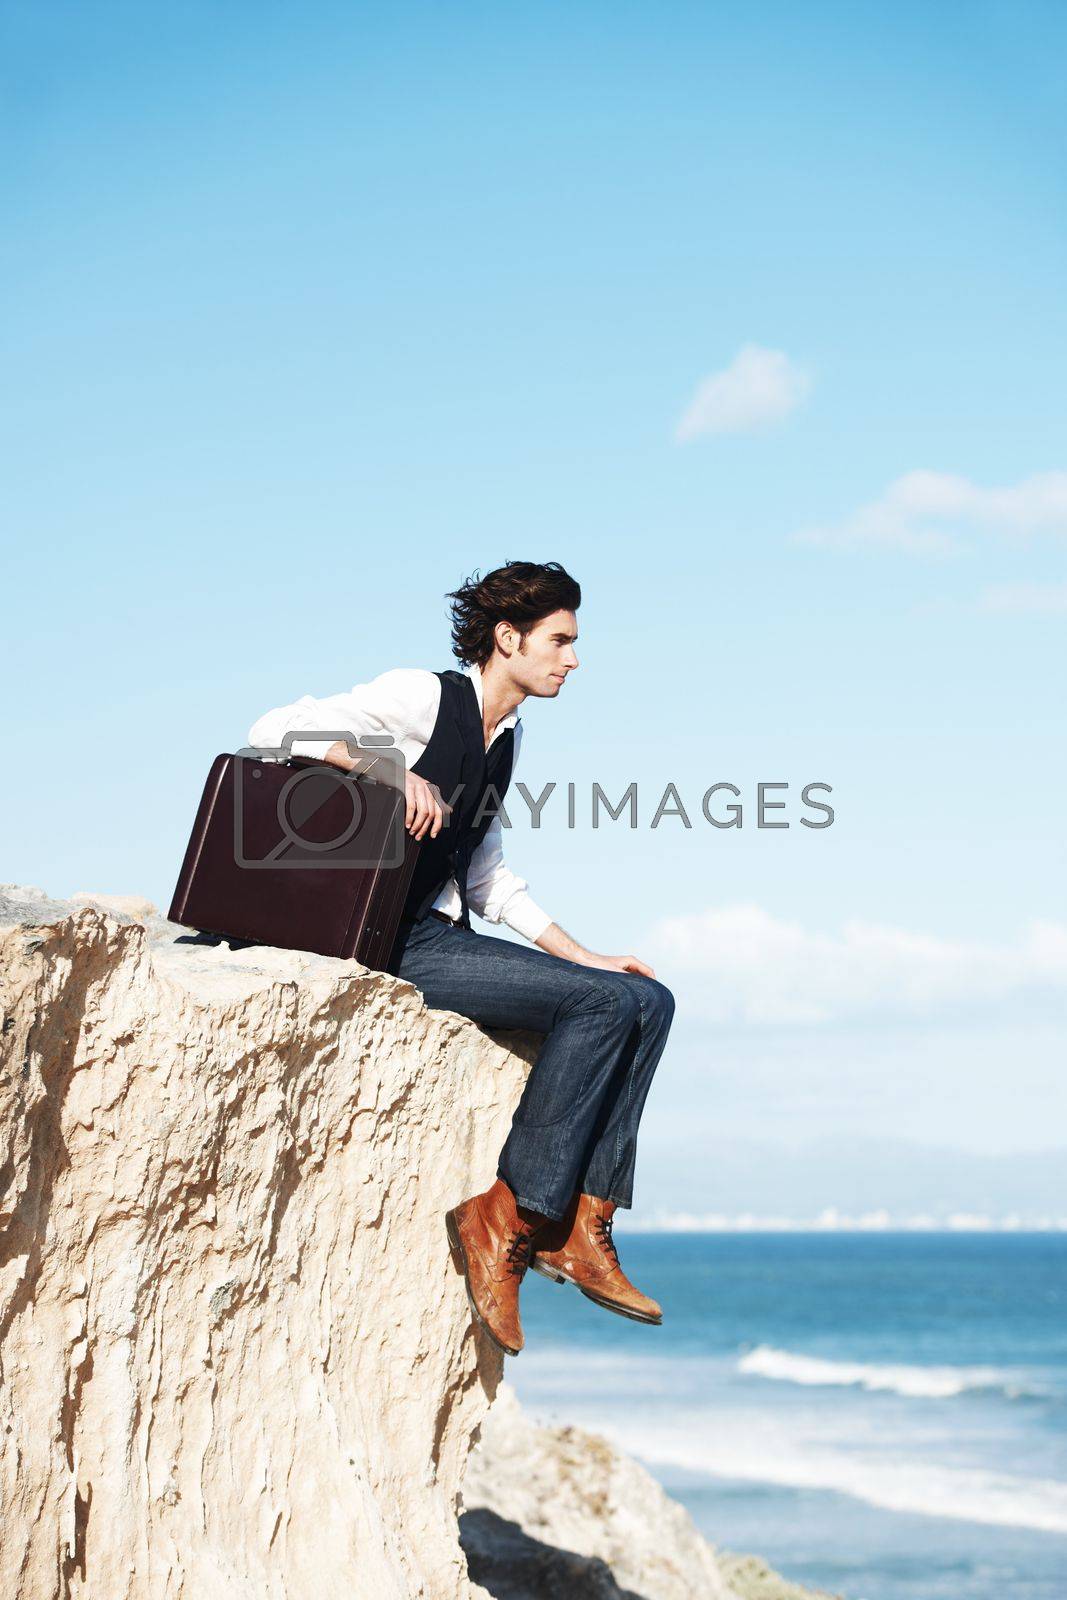 Royalty free image of Pondering the meaning of life. Pensive young man sitting with his briefcase on the edge of a cliff overlooking the ocean. by YuriArcurs